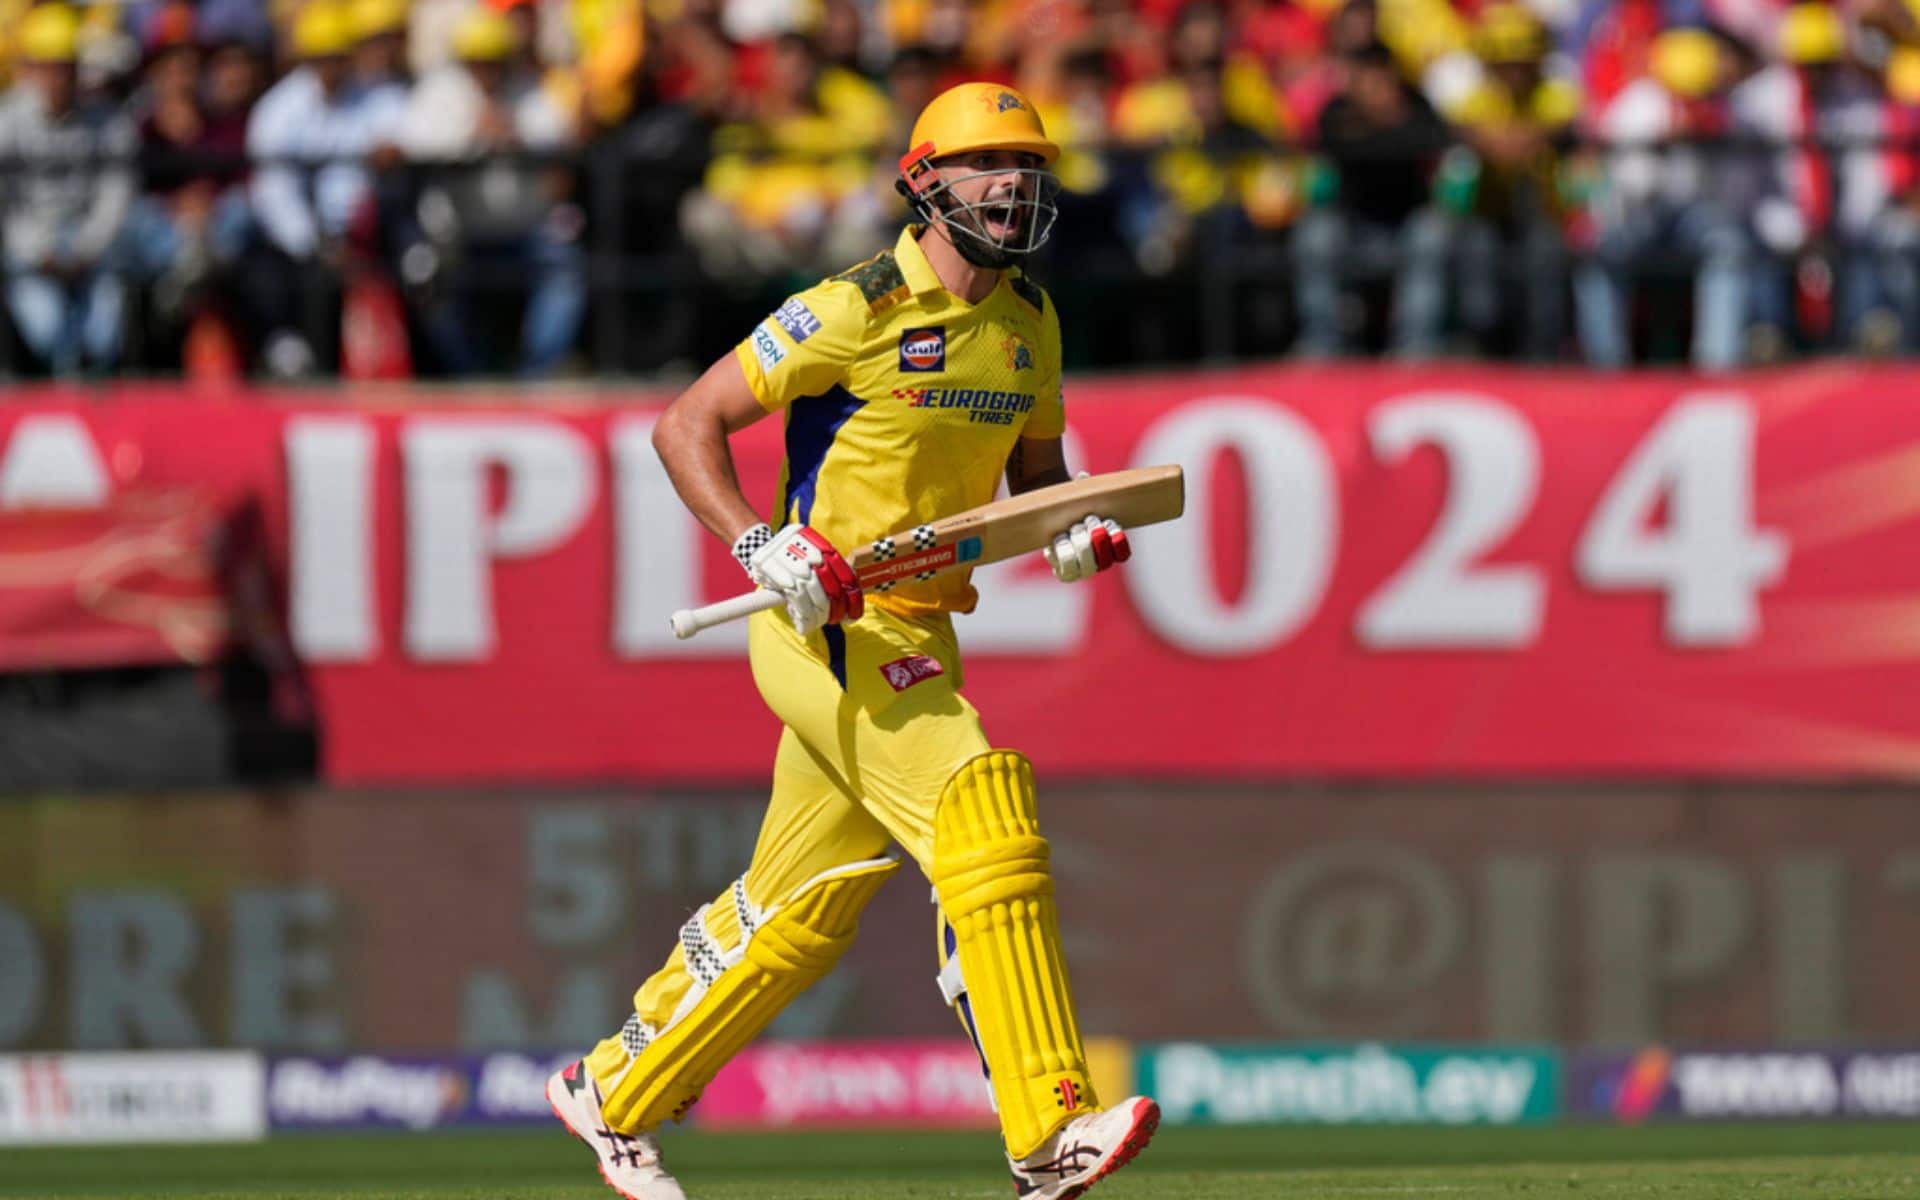 Daryl Micthell needs to deliver for CSK in the match [AP Photos]